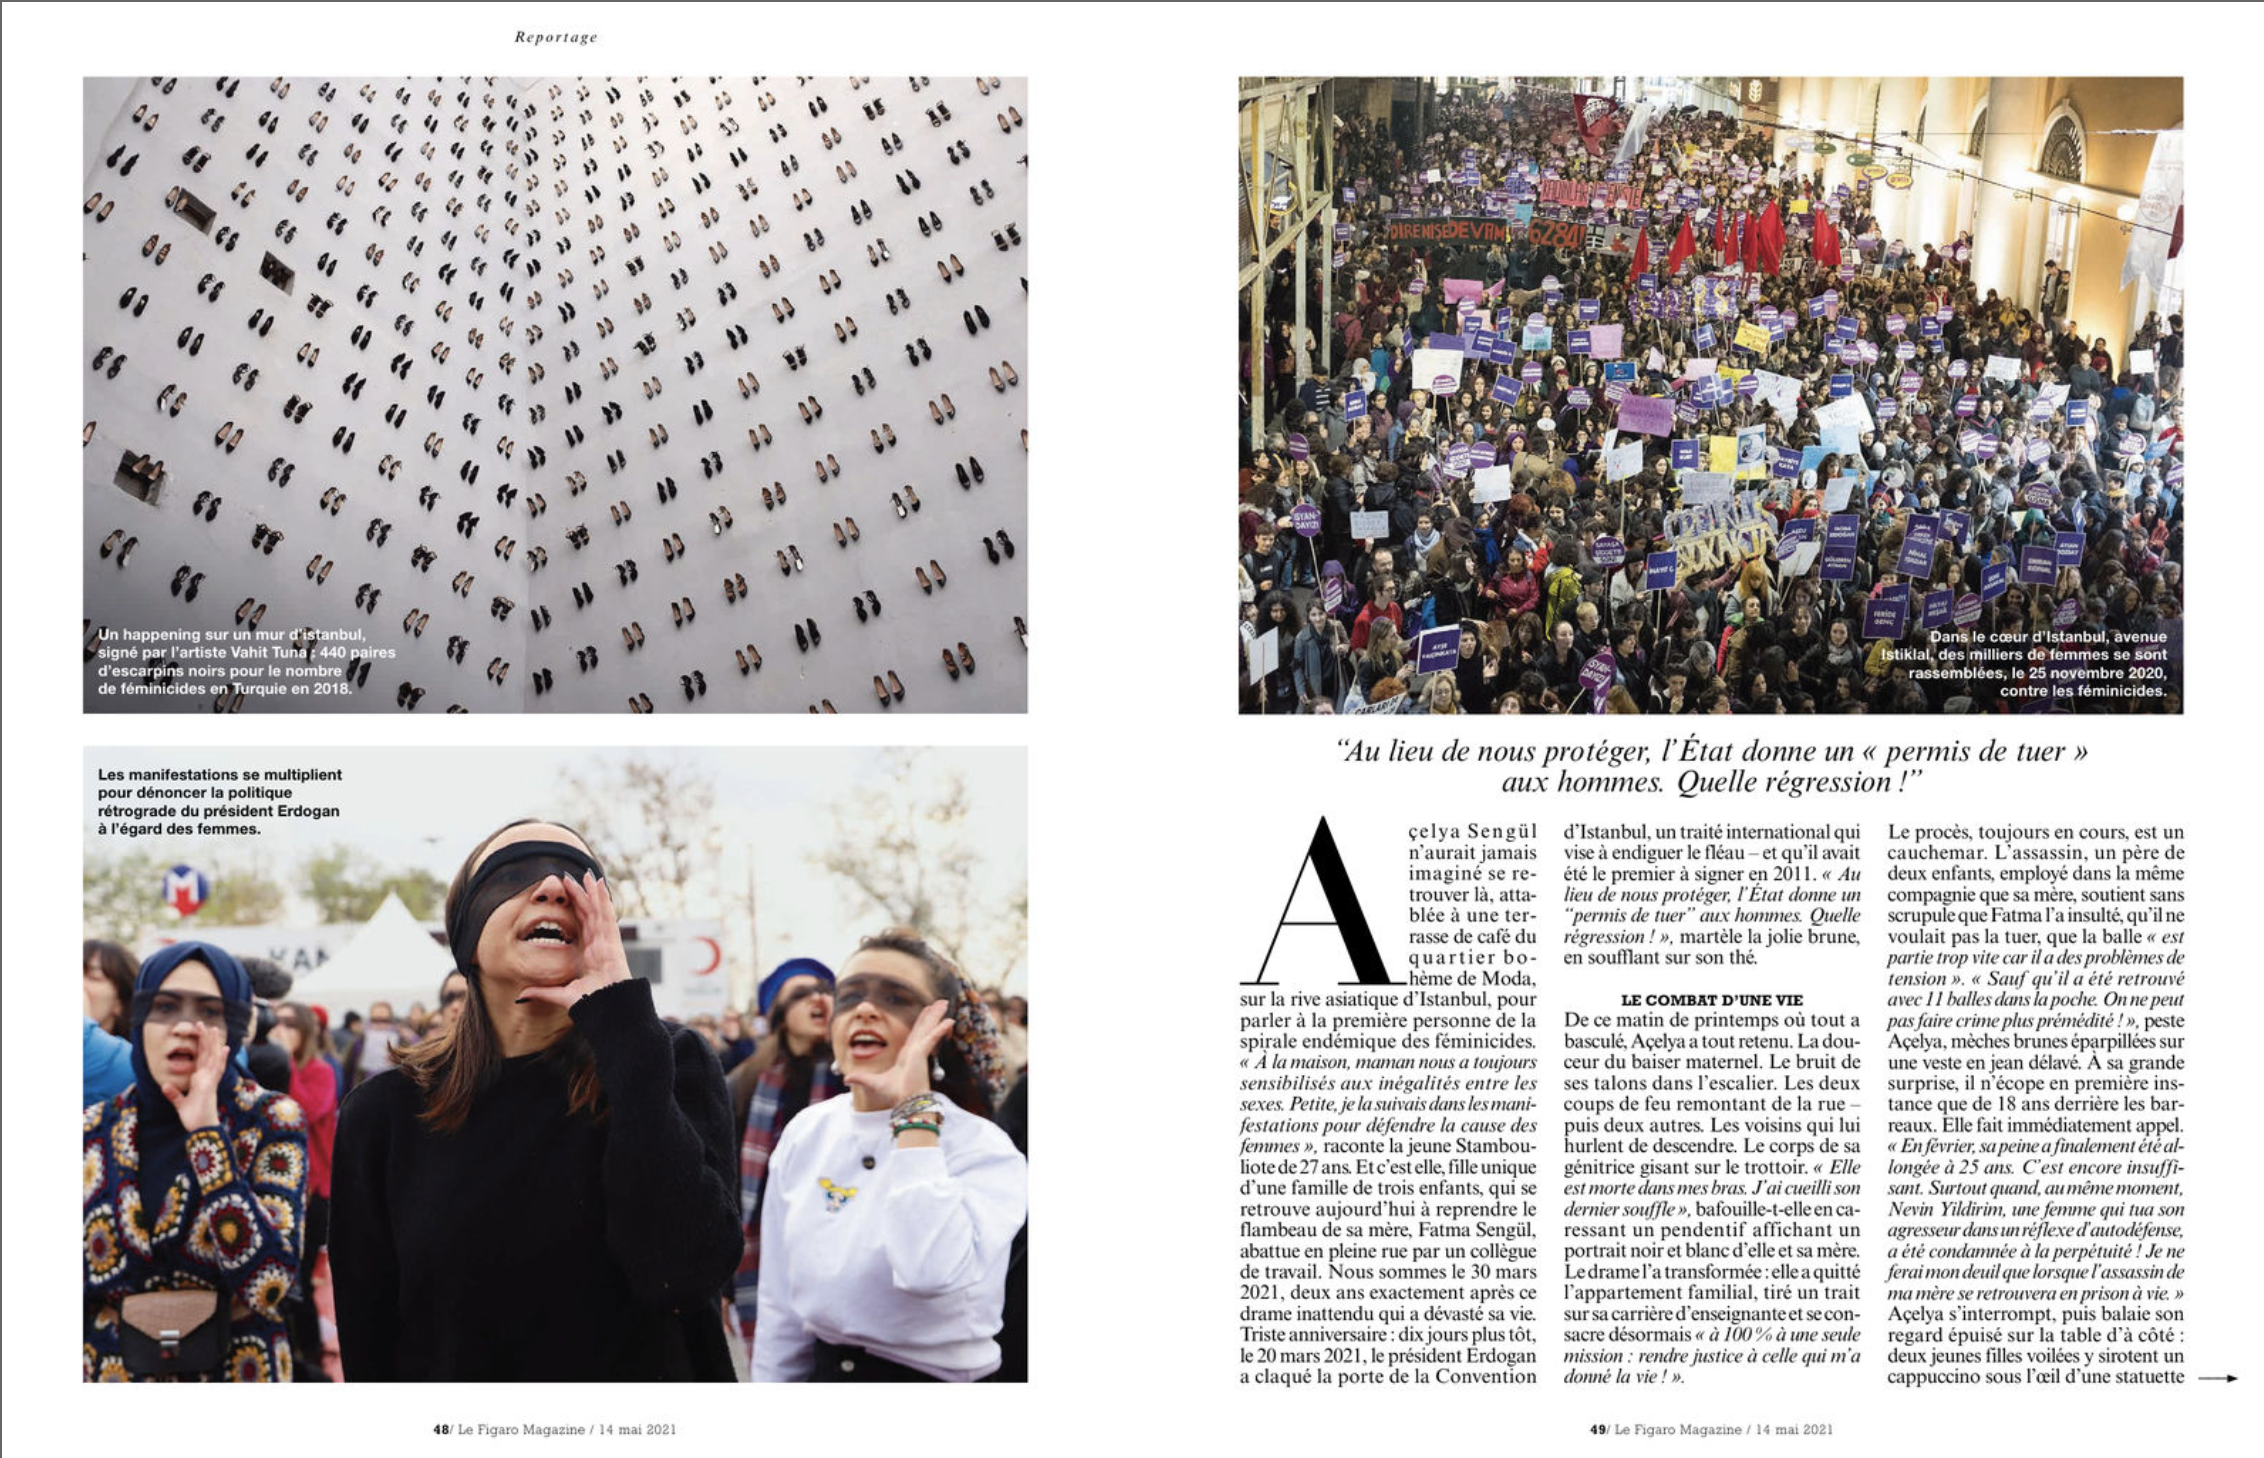 Image from Publications - Le Figaro Magazine - 8 pages